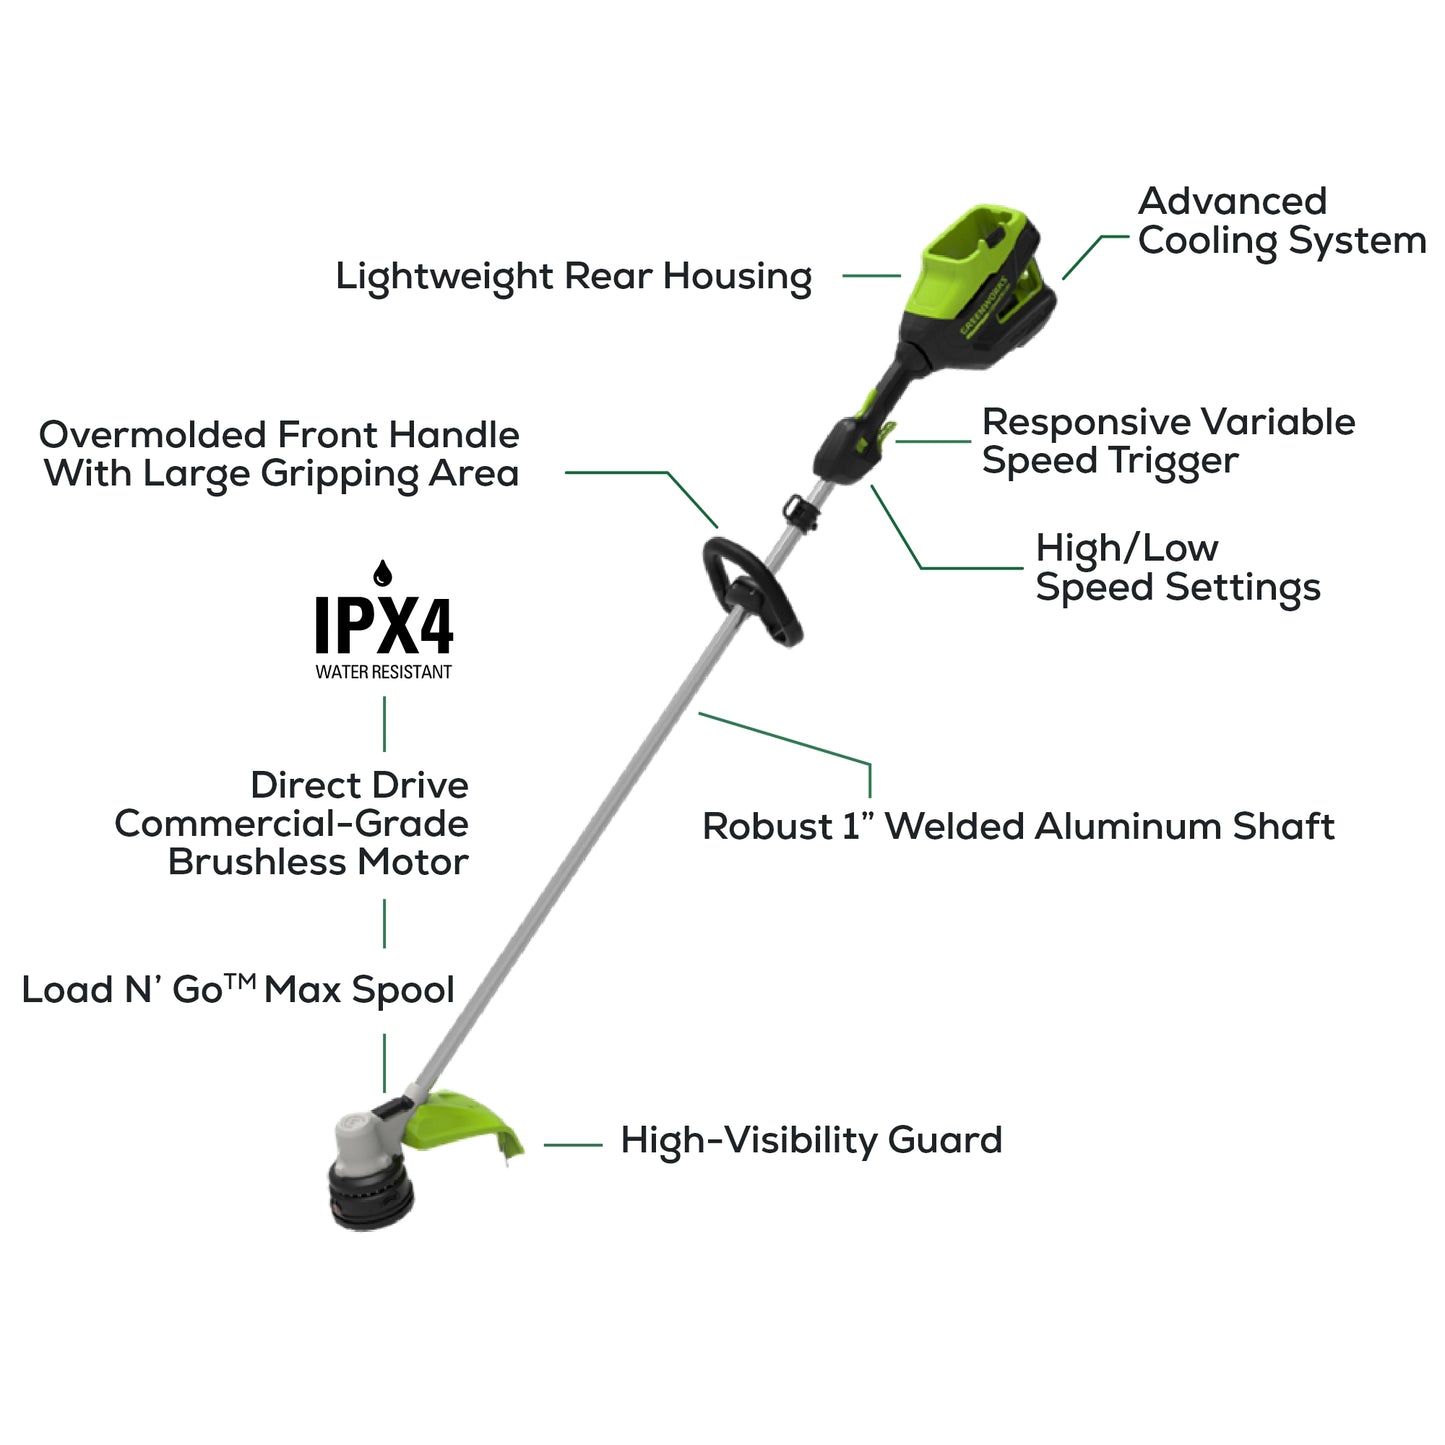 82V 1.2kW String Trimmer with 4Ah Battery and Dual Port Charger (82ST12-4DP)